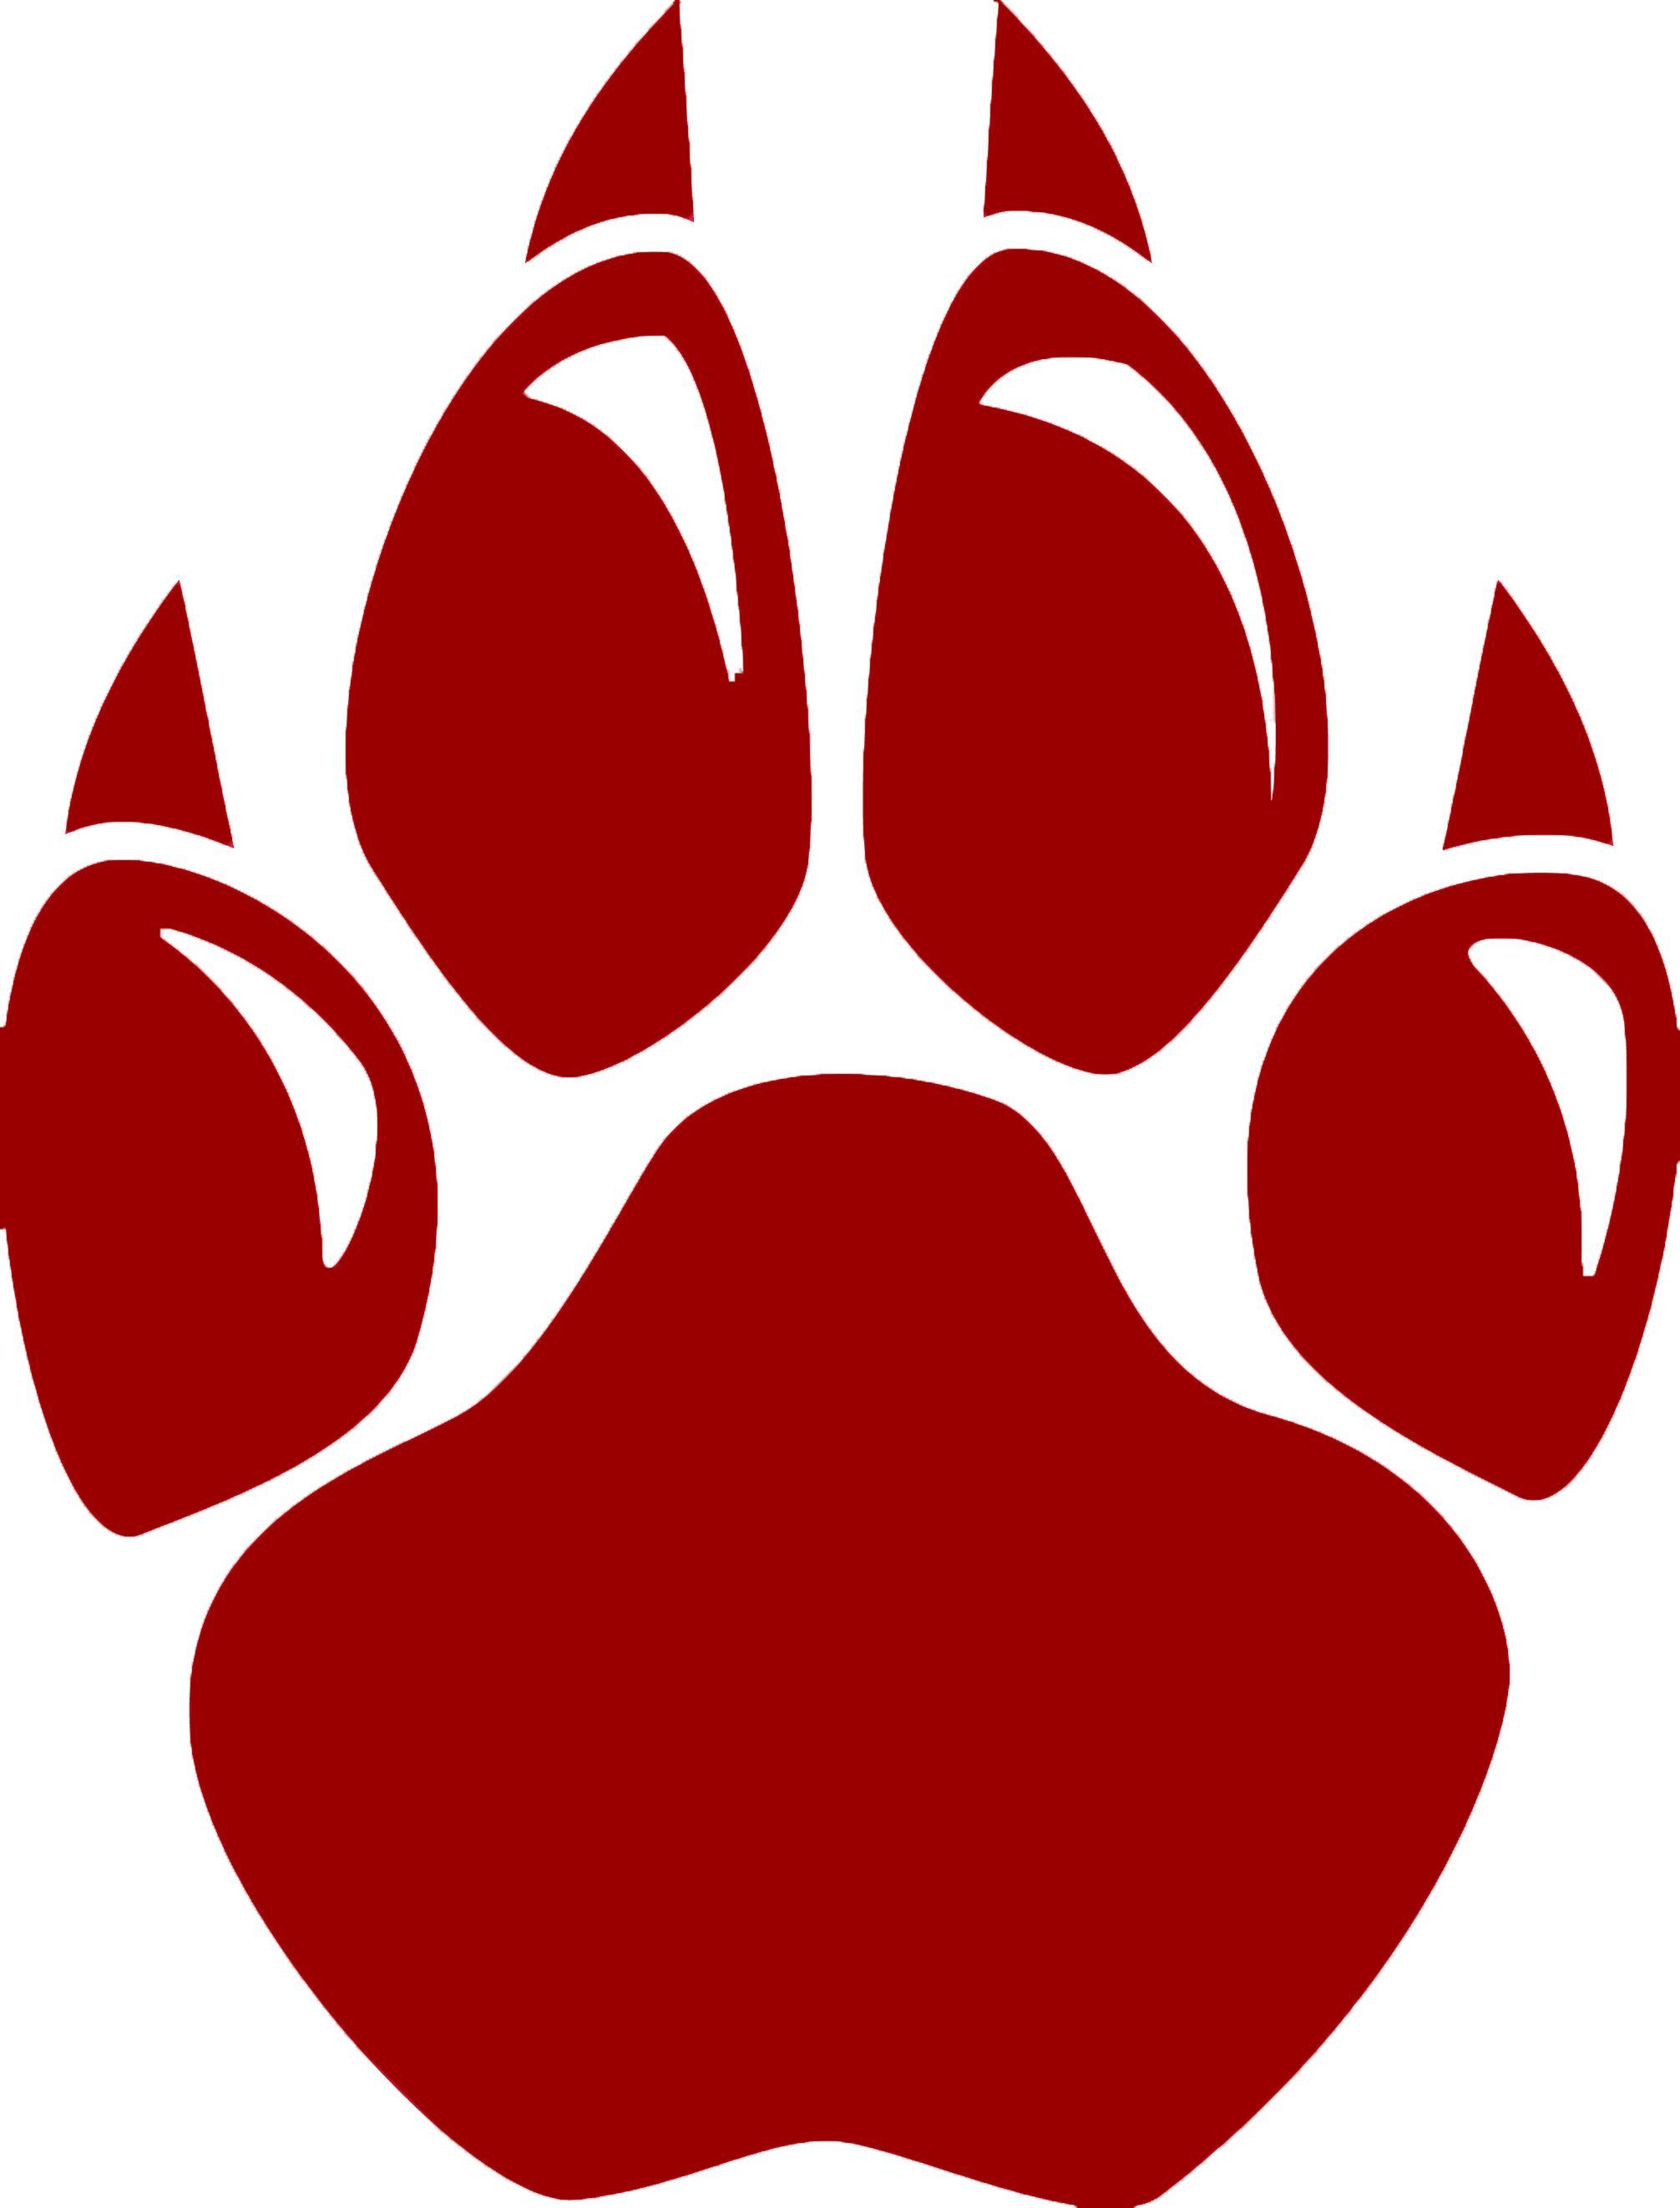 Wildcat Paw Logo - Free Wildcat Paw, Download Free Clip Art, Free Clip Art on Clipart ...